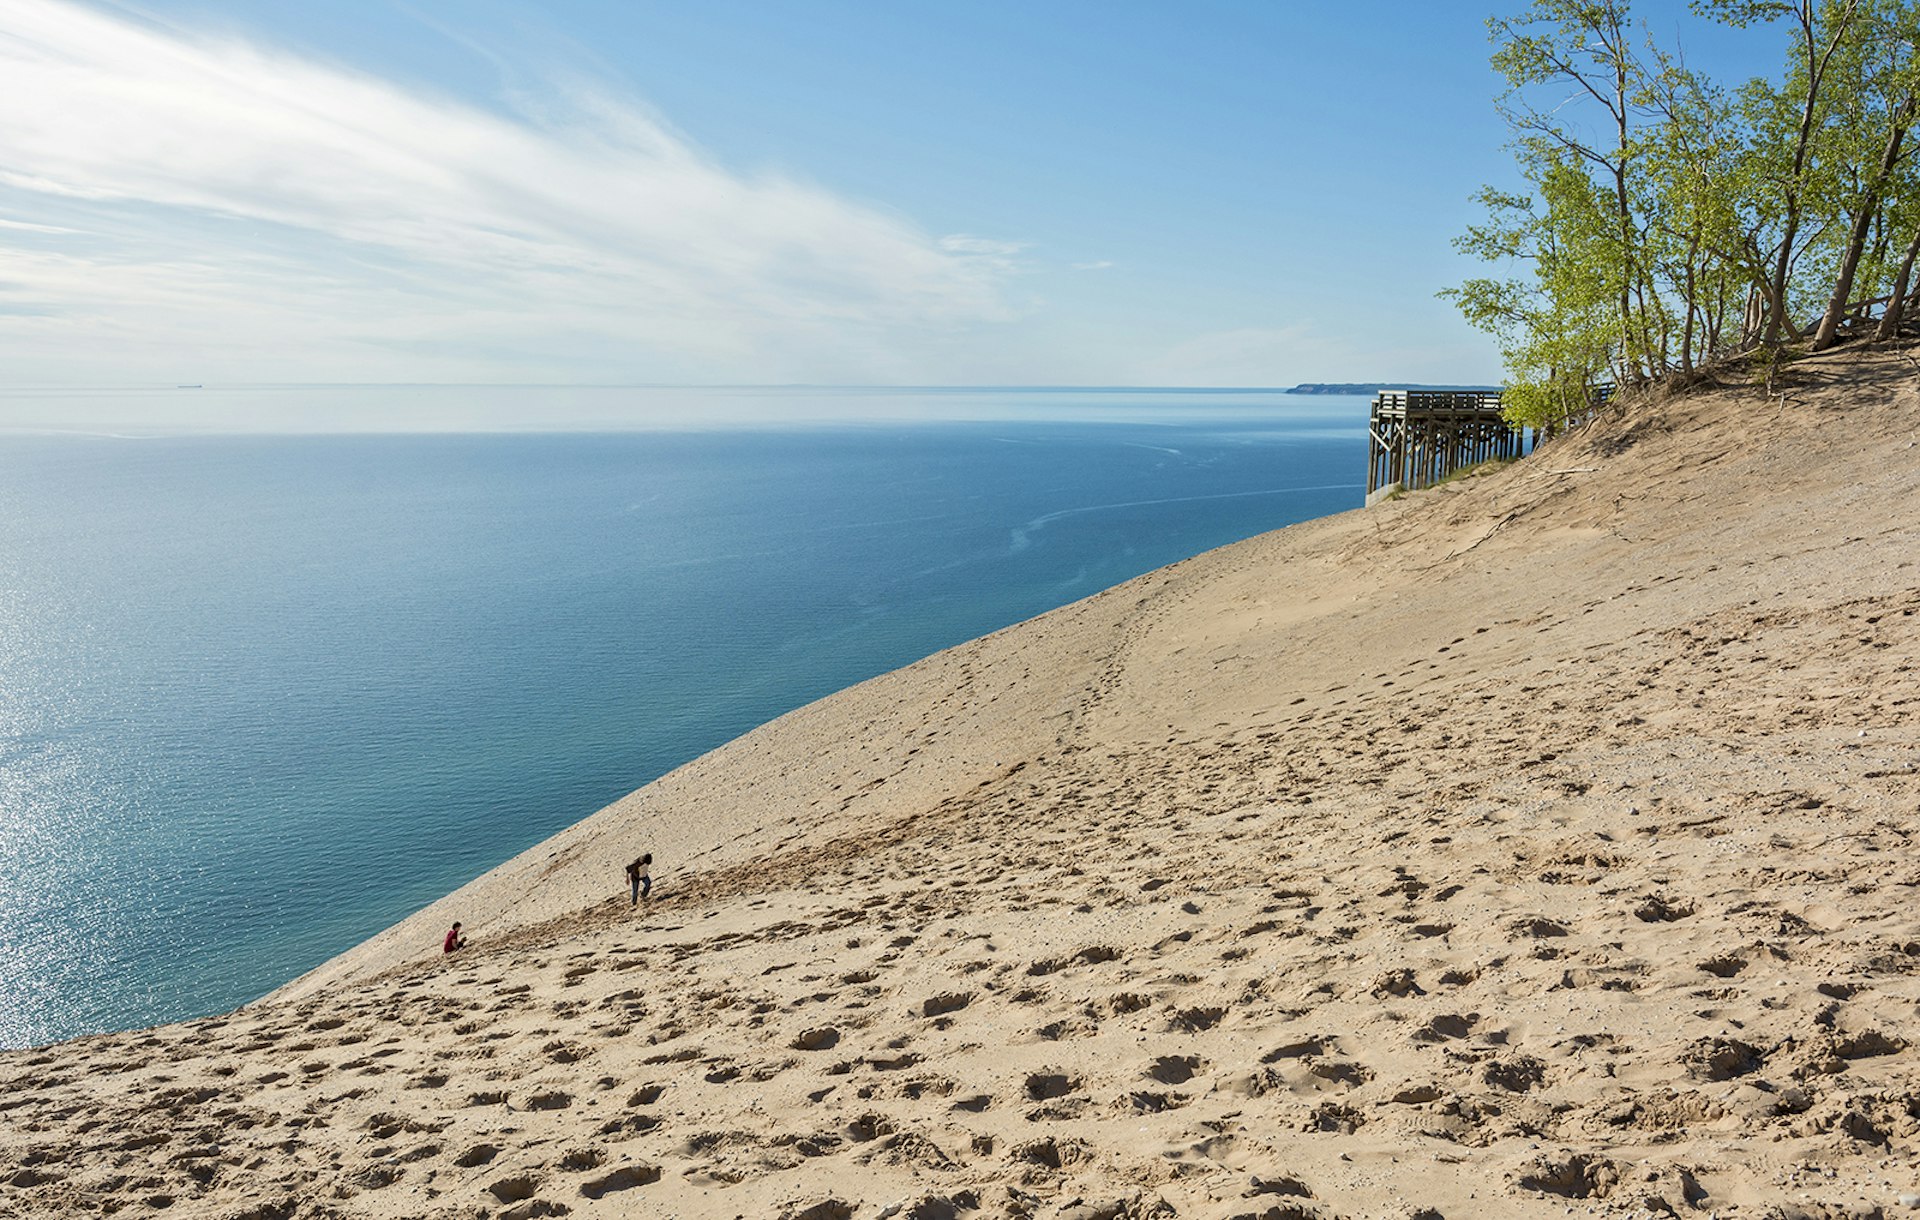 Two people hike up a massive golden sand dune with Lake Michigan in the background